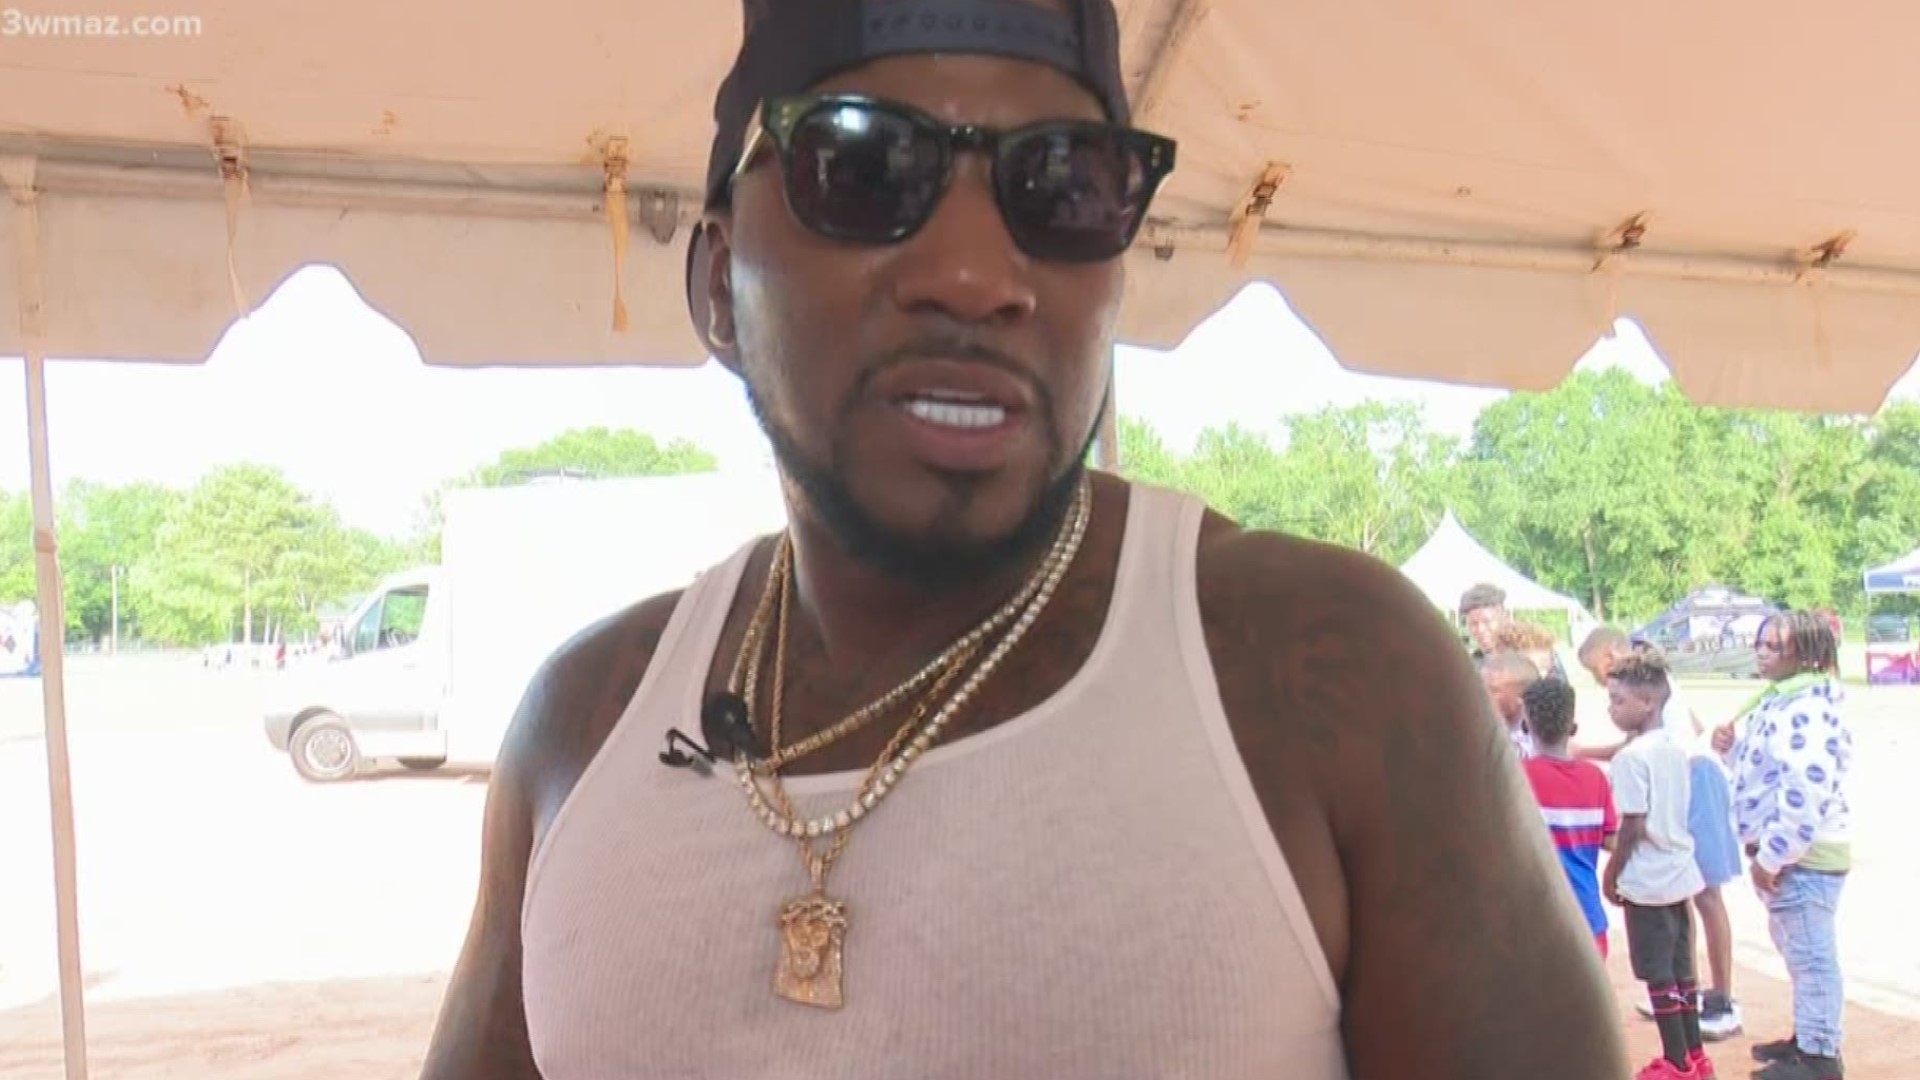 Rapper Young Jeezy stopped by his hometown of Hawkinsville Friday to give back. He gave free WiFi to the hospital and high school.